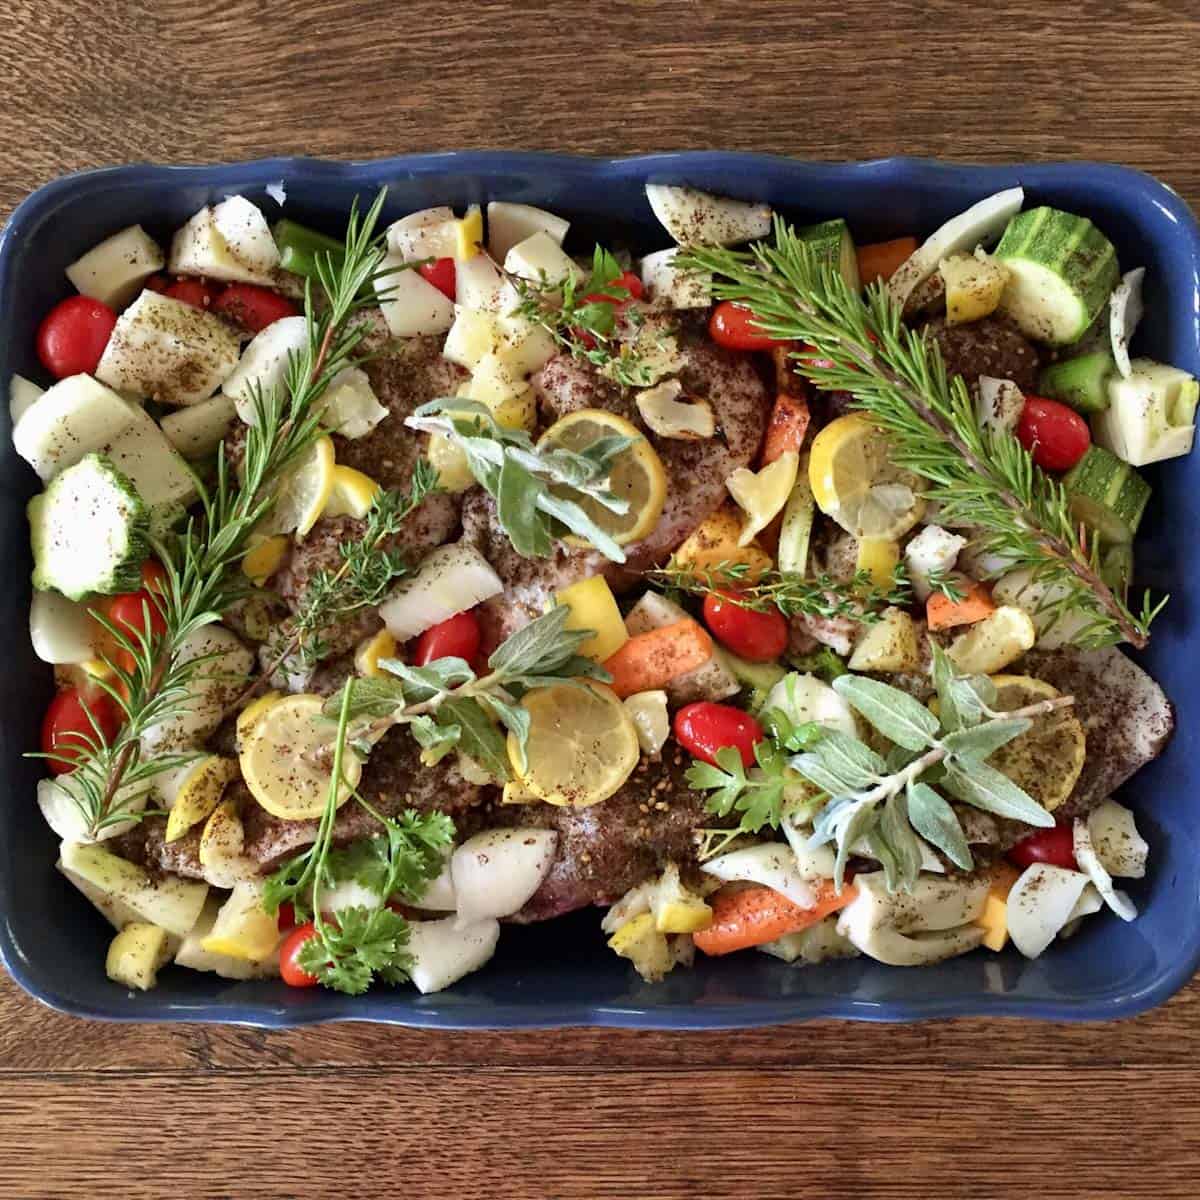 Lemon herb chicken with za'atar, sumac, onion, and vegetables in a blue baking dish.